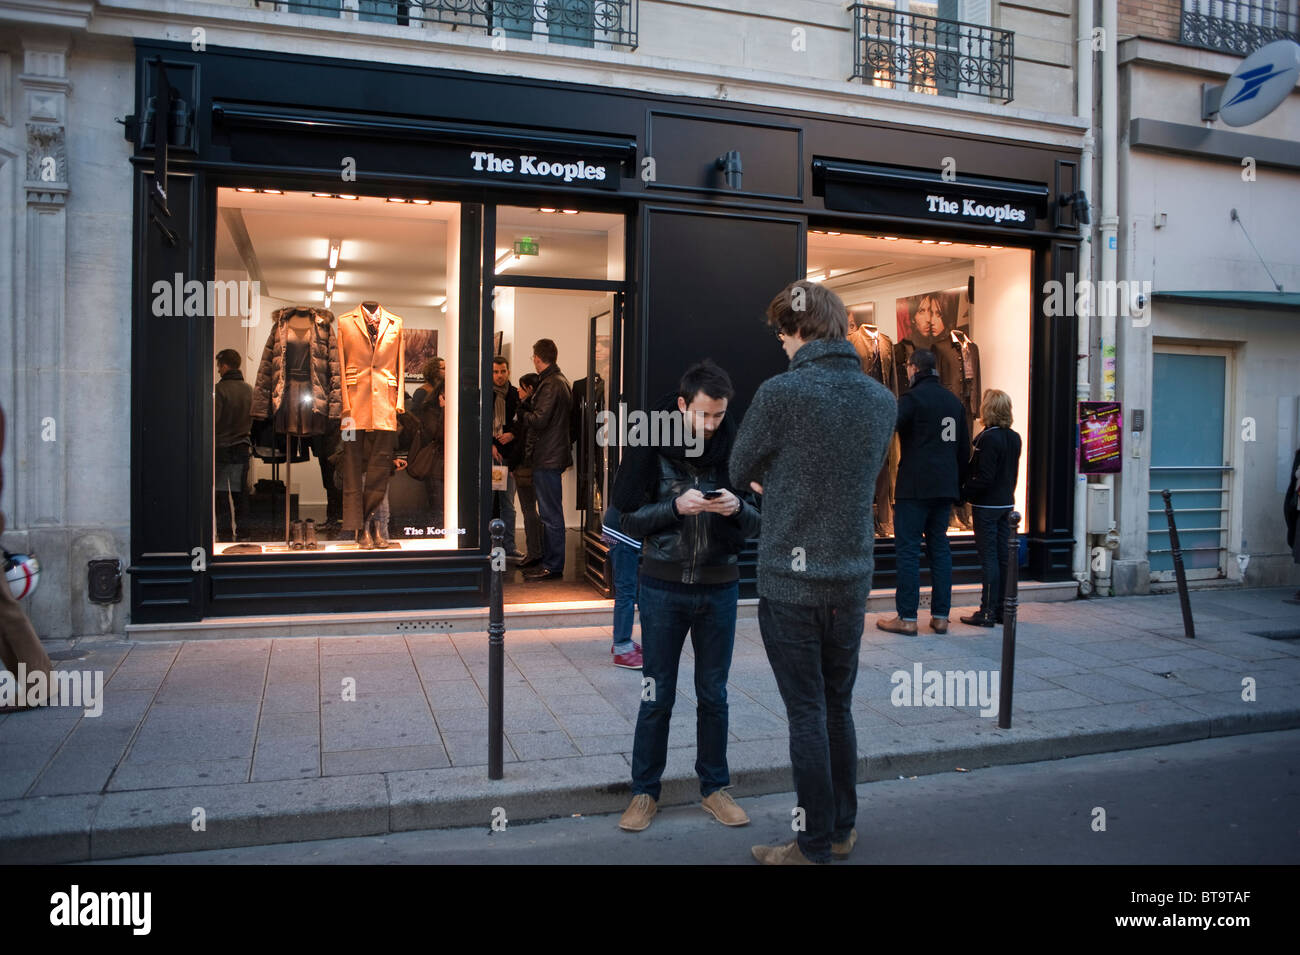 Paris, France, Street Scene, Le Marais District, Small Group People, Men With Cellphones Standing Outside Local Clothing Store, Shop Front 'The Kooples' Local Brand Stock Photo